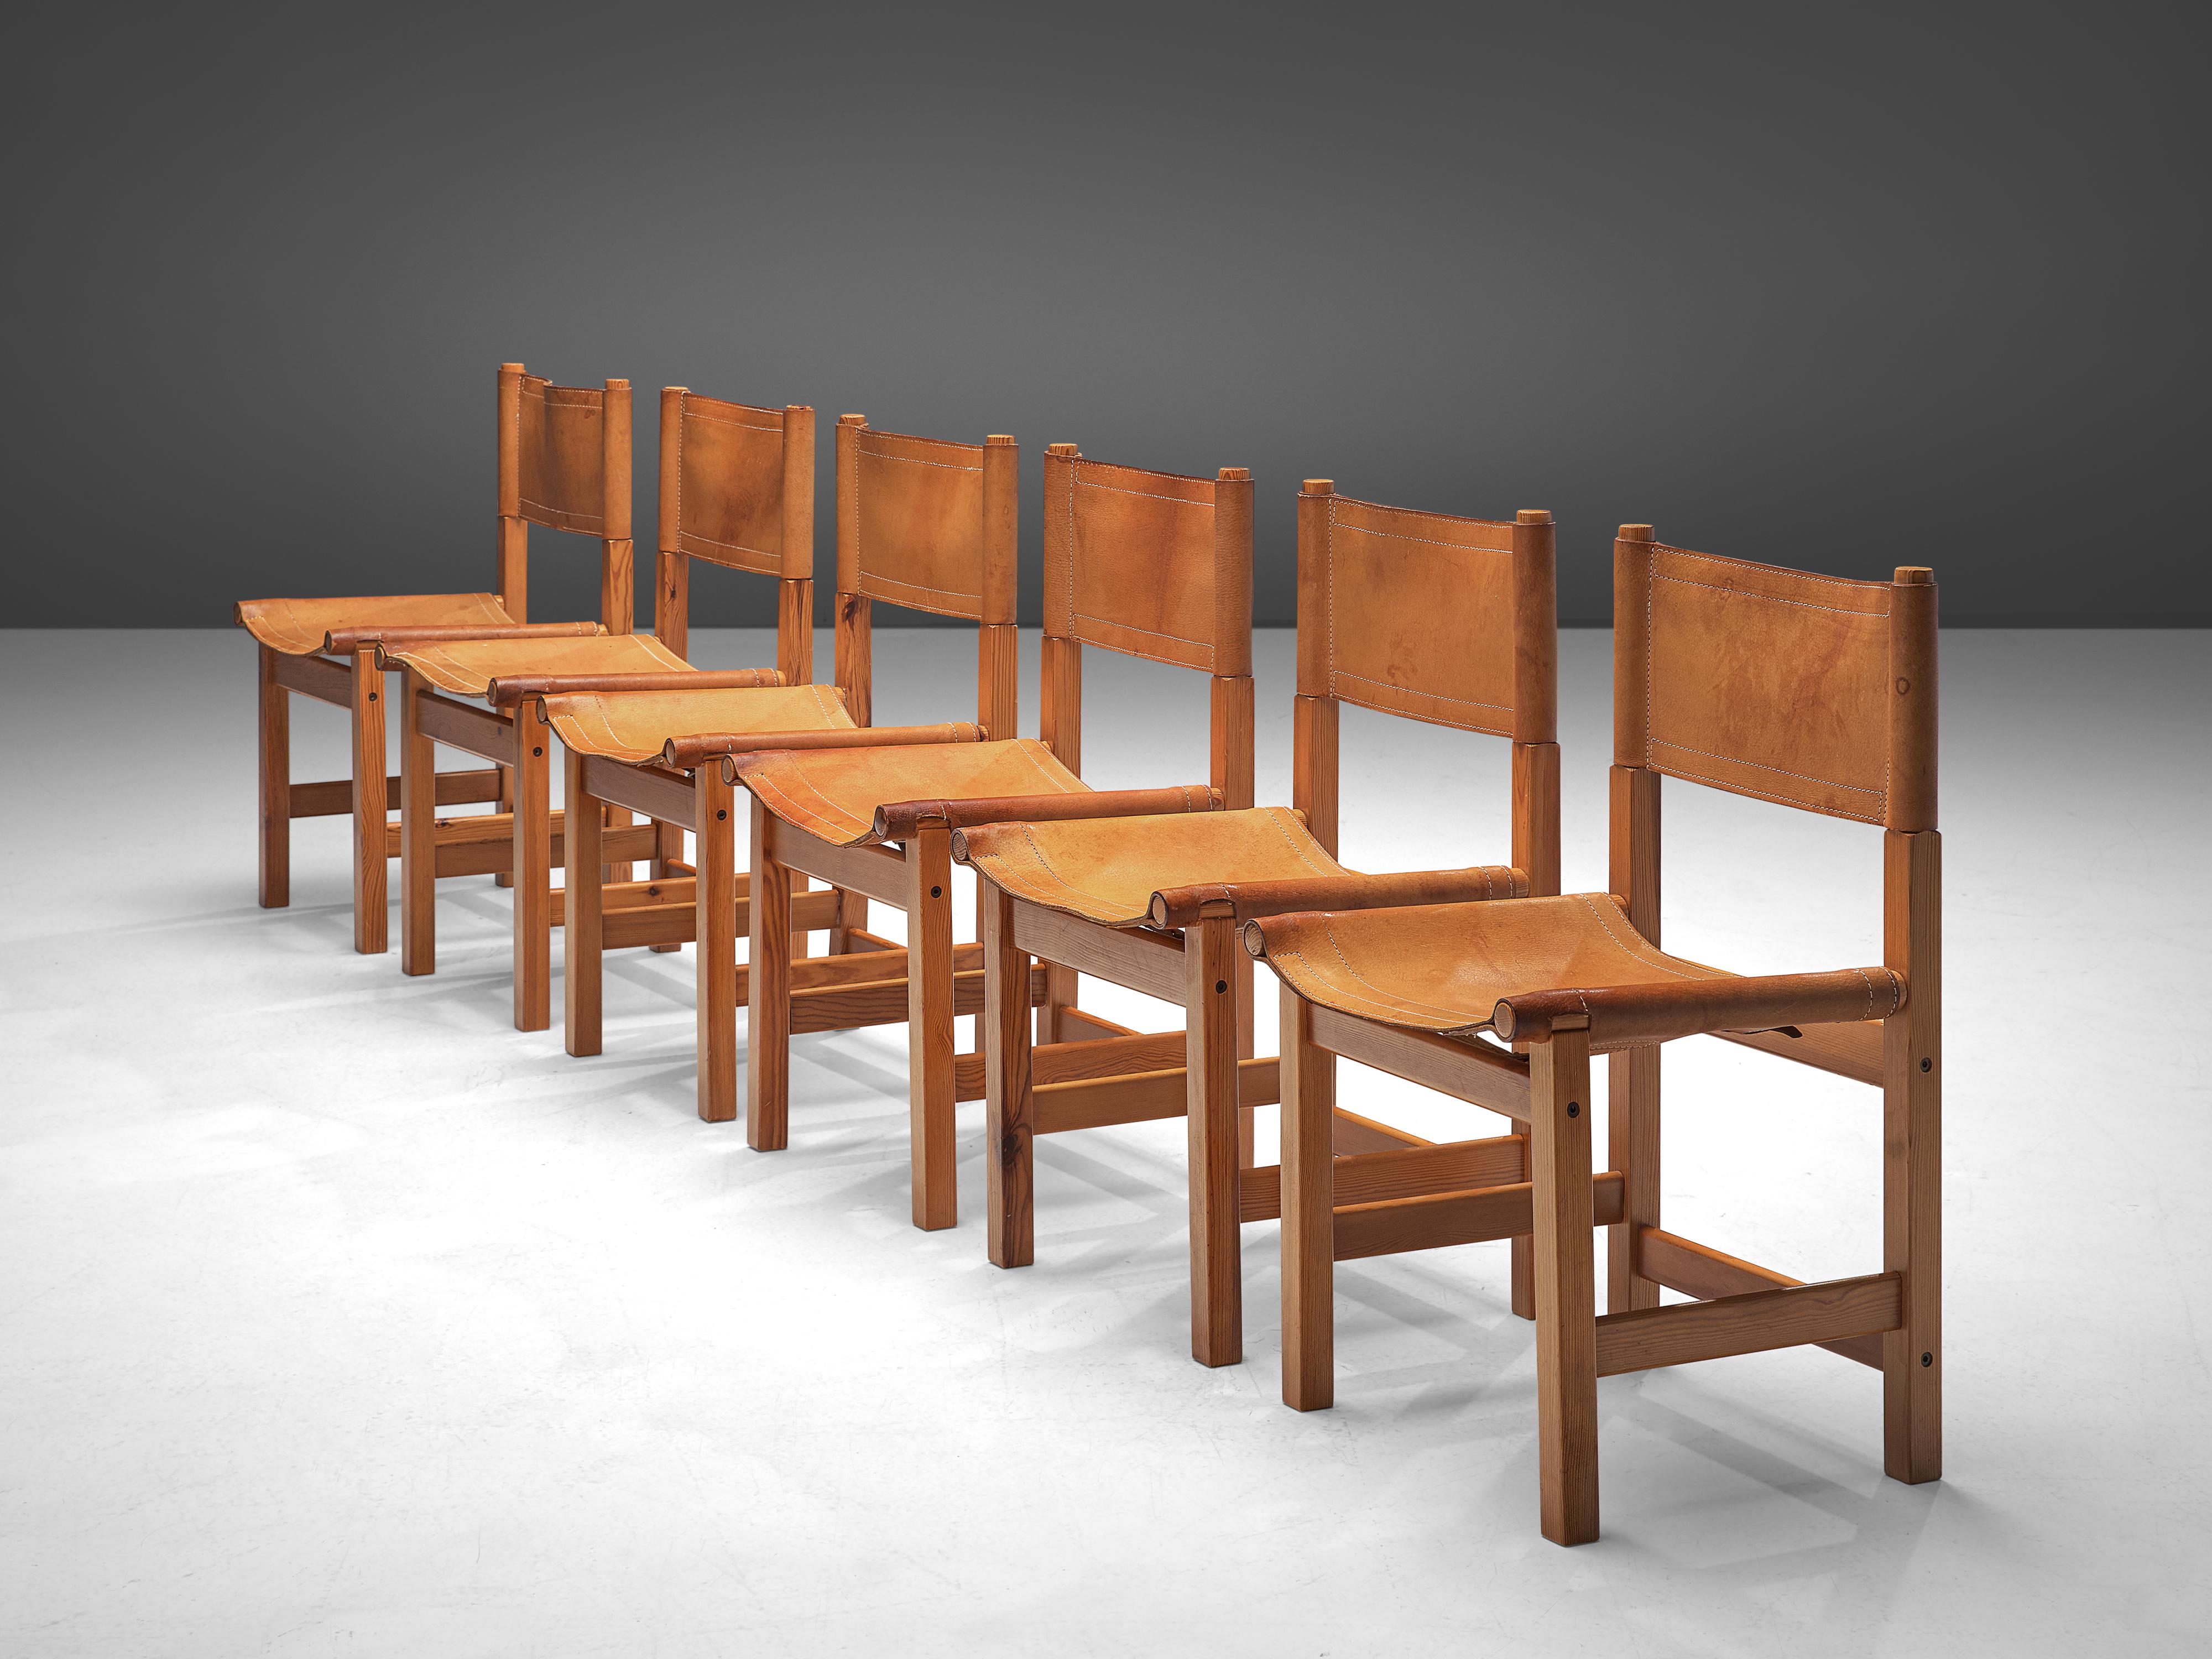 Set of six dining chairs, leather, pine, France 1960s

These French dining chairs show a basic design with straight lines, and a sincere construction in pine wood. The cognac leather seats and backs provide a pleasant comfort, and show nice stitches